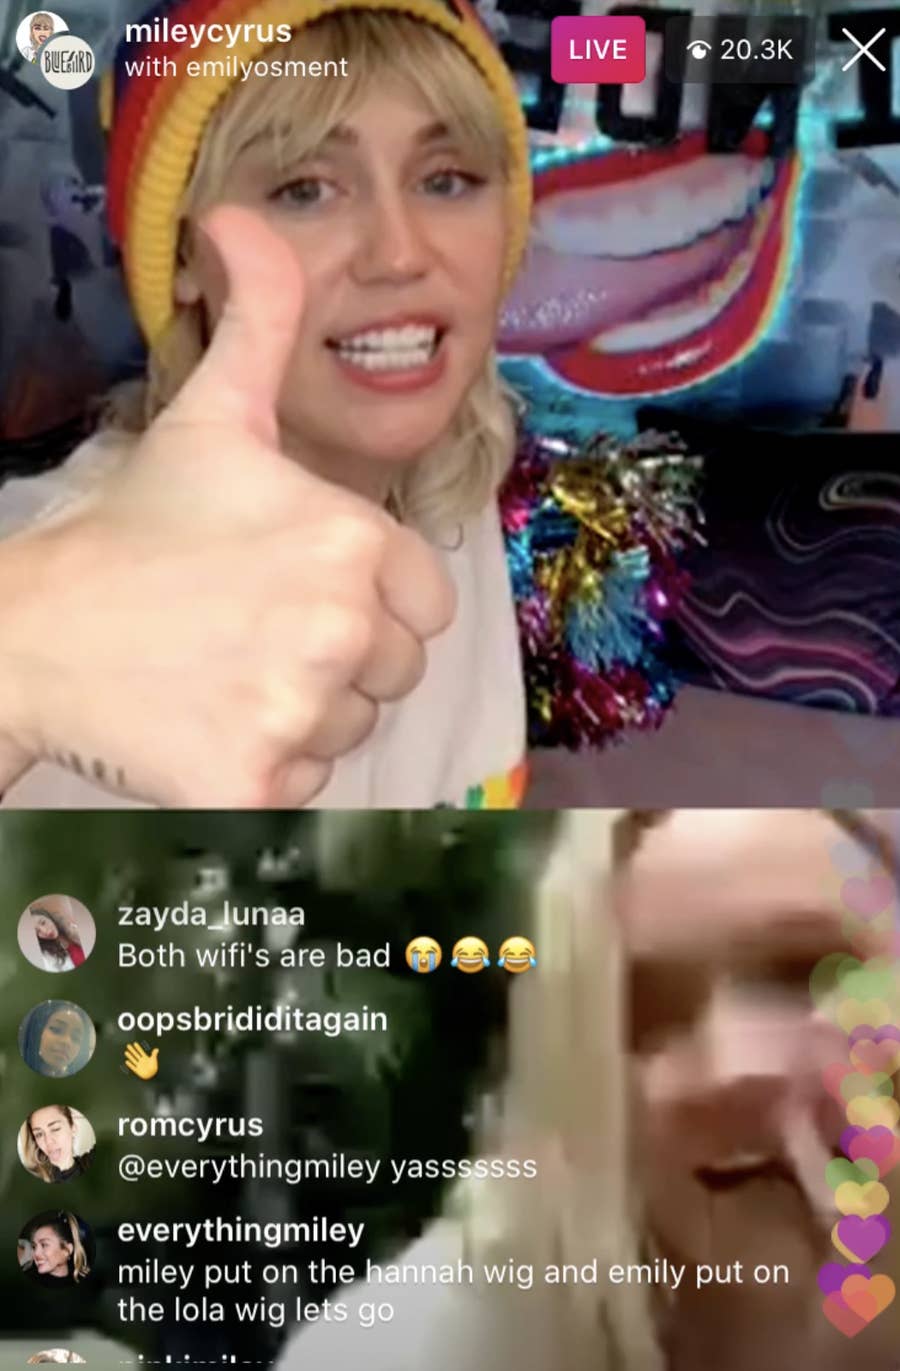 Selena Gomez Lesbian Sex Demi Lovato Emily And Miley Cyrus And Ashley Tisdale - Miley Cyrus And Emily Osment Reunited On Instagram Live